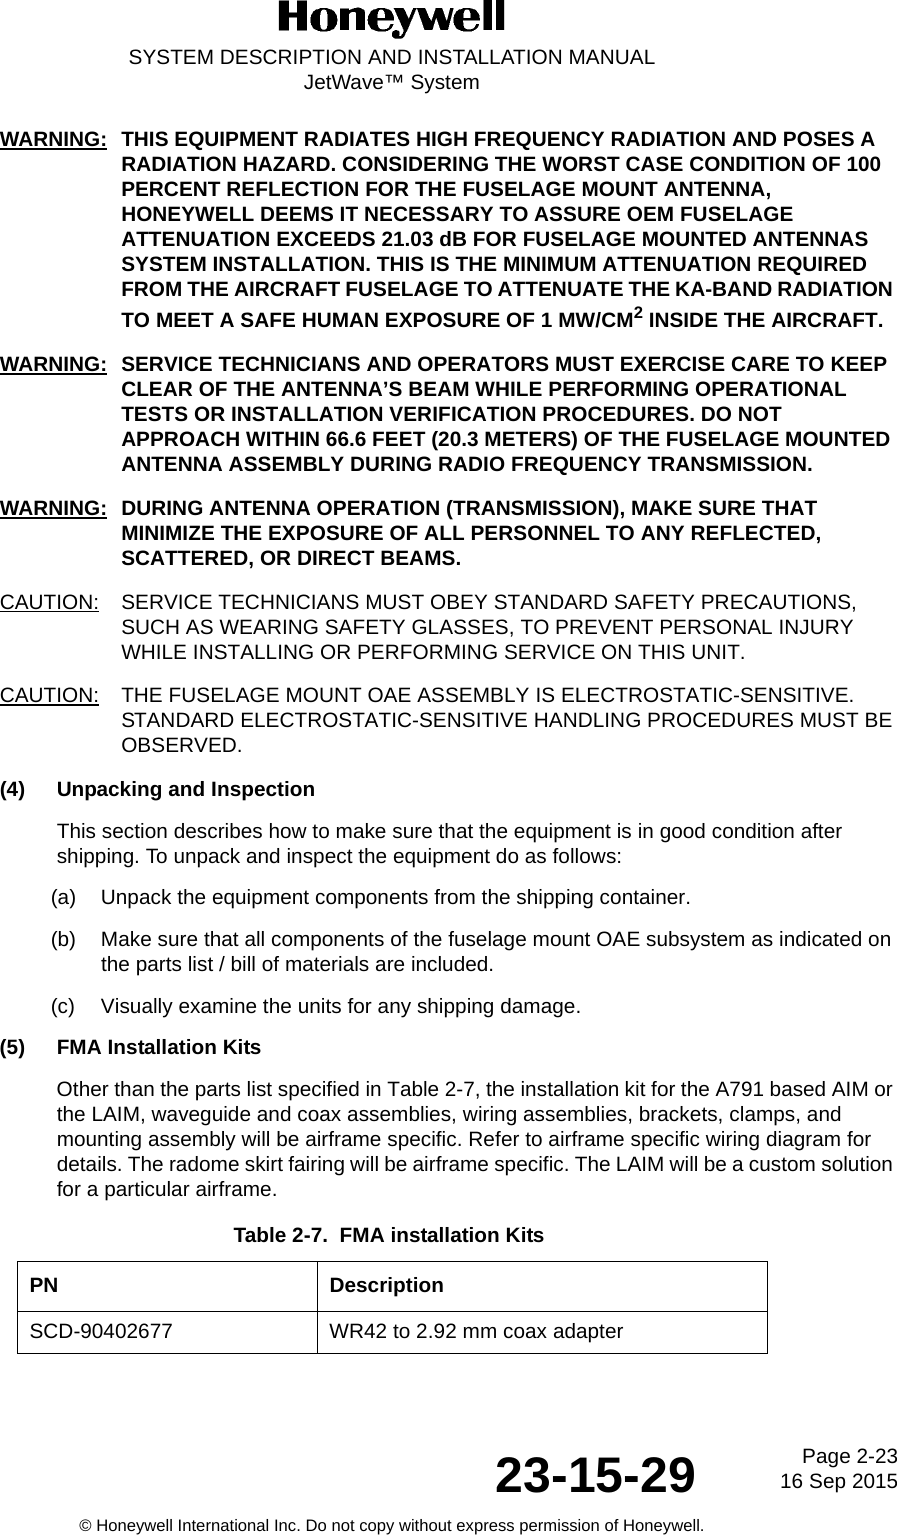 Page 2-23 16 Sep 201523-15-29SYSTEM DESCRIPTION AND INSTALLATION MANUALJetWave™ System© Honeywell International Inc. Do not copy without express permission of Honeywell.WARNING: THIS EQUIPMENT RADIATES HIGH FREQUENCY RADIATION AND POSES A RADIATION HAZARD. CONSIDERING THE WORST CASE CONDITION OF 100 PERCENT REFLECTION FOR THE FUSELAGE MOUNT ANTENNA, HONEYWELL DEEMS IT NECESSARY TO ASSURE OEM FUSELAGE ATTENUATION EXCEEDS 21.03 dB FOR FUSELAGE MOUNTED ANTENNAS SYSTEM INSTALLATION. THIS IS THE MINIMUM ATTENUATION REQUIRED FROM THE AIRCRAFT FUSELAGE TO ATTENUATE THE KA-BAND RADIATION TO MEET A SAFE HUMAN EXPOSURE OF 1 MW/CM2 INSIDE THE AIRCRAFT. WARNING: SERVICE TECHNICIANS AND OPERATORS MUST EXERCISE CARE TO KEEP CLEAR OF THE ANTENNA’S BEAM WHILE PERFORMING OPERATIONAL TESTS OR INSTALLATION VERIFICATION PROCEDURES. DO NOT APPROACH WITHIN 66.6 FEET (20.3 METERS) OF THE FUSELAGE MOUNTED ANTENNA ASSEMBLY DURING RADIO FREQUENCY TRANSMISSION.WARNING: DURING ANTENNA OPERATION (TRANSMISSION), MAKE SURE THAT MINIMIZE THE EXPOSURE OF ALL PERSONNEL TO ANY REFLECTED, SCATTERED, OR DIRECT BEAMS. CAUTION: SERVICE TECHNICIANS MUST OBEY STANDARD SAFETY PRECAUTIONS, SUCH AS WEARING SAFETY GLASSES, TO PREVENT PERSONAL INJURY WHILE INSTALLING OR PERFORMING SERVICE ON THIS UNIT. CAUTION: THE FUSELAGE MOUNT OAE ASSEMBLY IS ELECTROSTATIC-SENSITIVE. STANDARD ELECTROSTATIC-SENSITIVE HANDLING PROCEDURES MUST BE OBSERVED.(4) Unpacking and InspectionThis section describes how to make sure that the equipment is in good condition after shipping. To unpack and inspect the equipment do as follows:(a) Unpack the equipment components from the shipping container.(b) Make sure that all components of the fuselage mount OAE subsystem as indicated on the parts list / bill of materials are included.(c) Visually examine the units for any shipping damage. (5) FMA Installation KitsOther than the parts list specified in Table 2-7, the installation kit for the A791 based AIM or the LAIM, waveguide and coax assemblies, wiring assemblies, brackets, clamps, and mounting assembly will be airframe specific. Refer to airframe specific wiring diagram for details. The radome skirt fairing will be airframe specific. The LAIM will be a custom solution for a particular airframe.Table 2-7.  FMA installation Kits PN DescriptionSCD-90402677 WR42 to 2.92 mm coax adapter